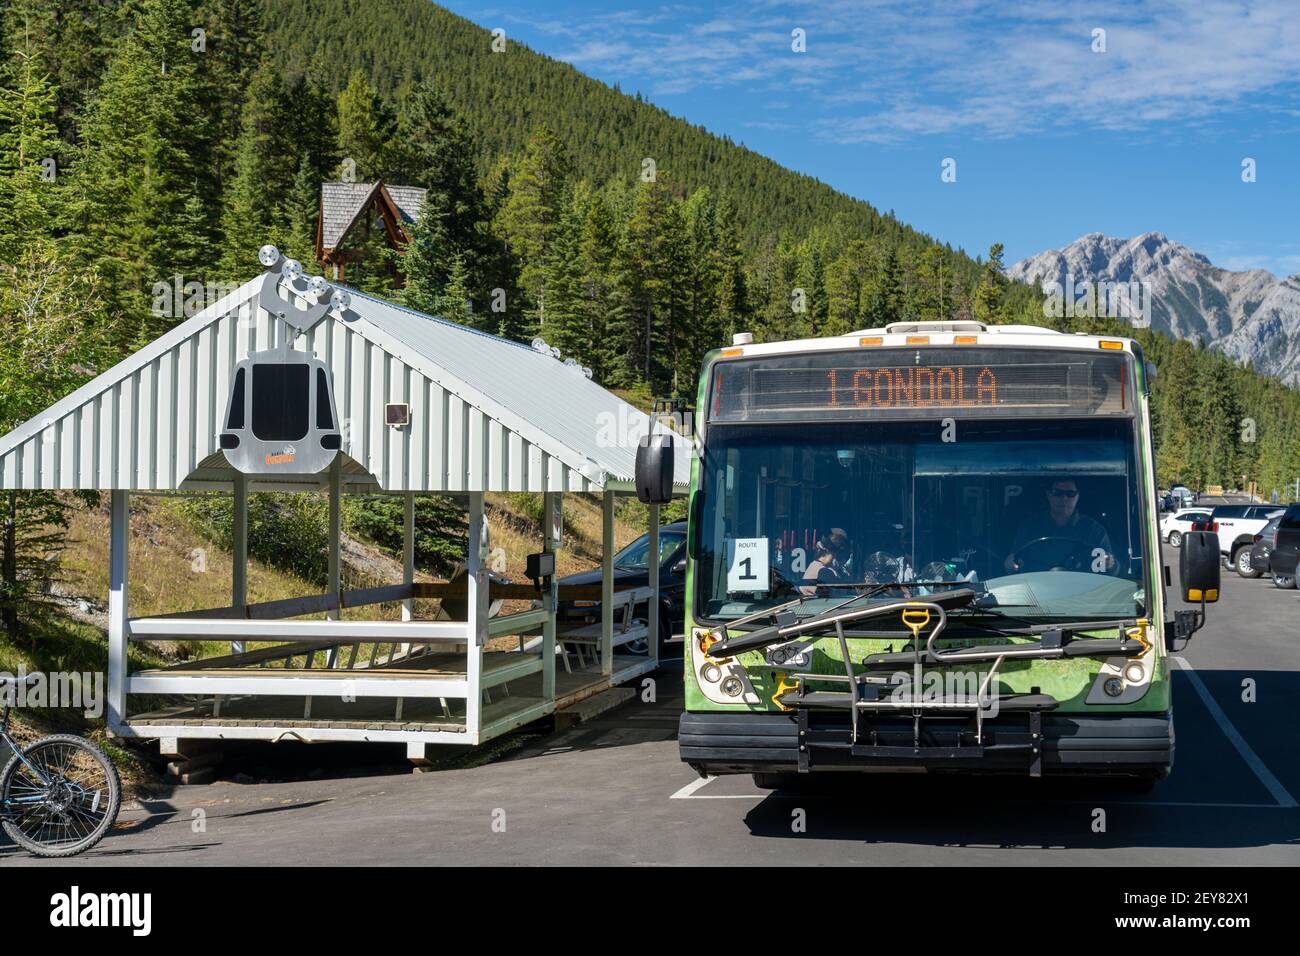 Banff Gondola bus stop in summer time. Banff National Park, Canadian Rockies. Stock Photo